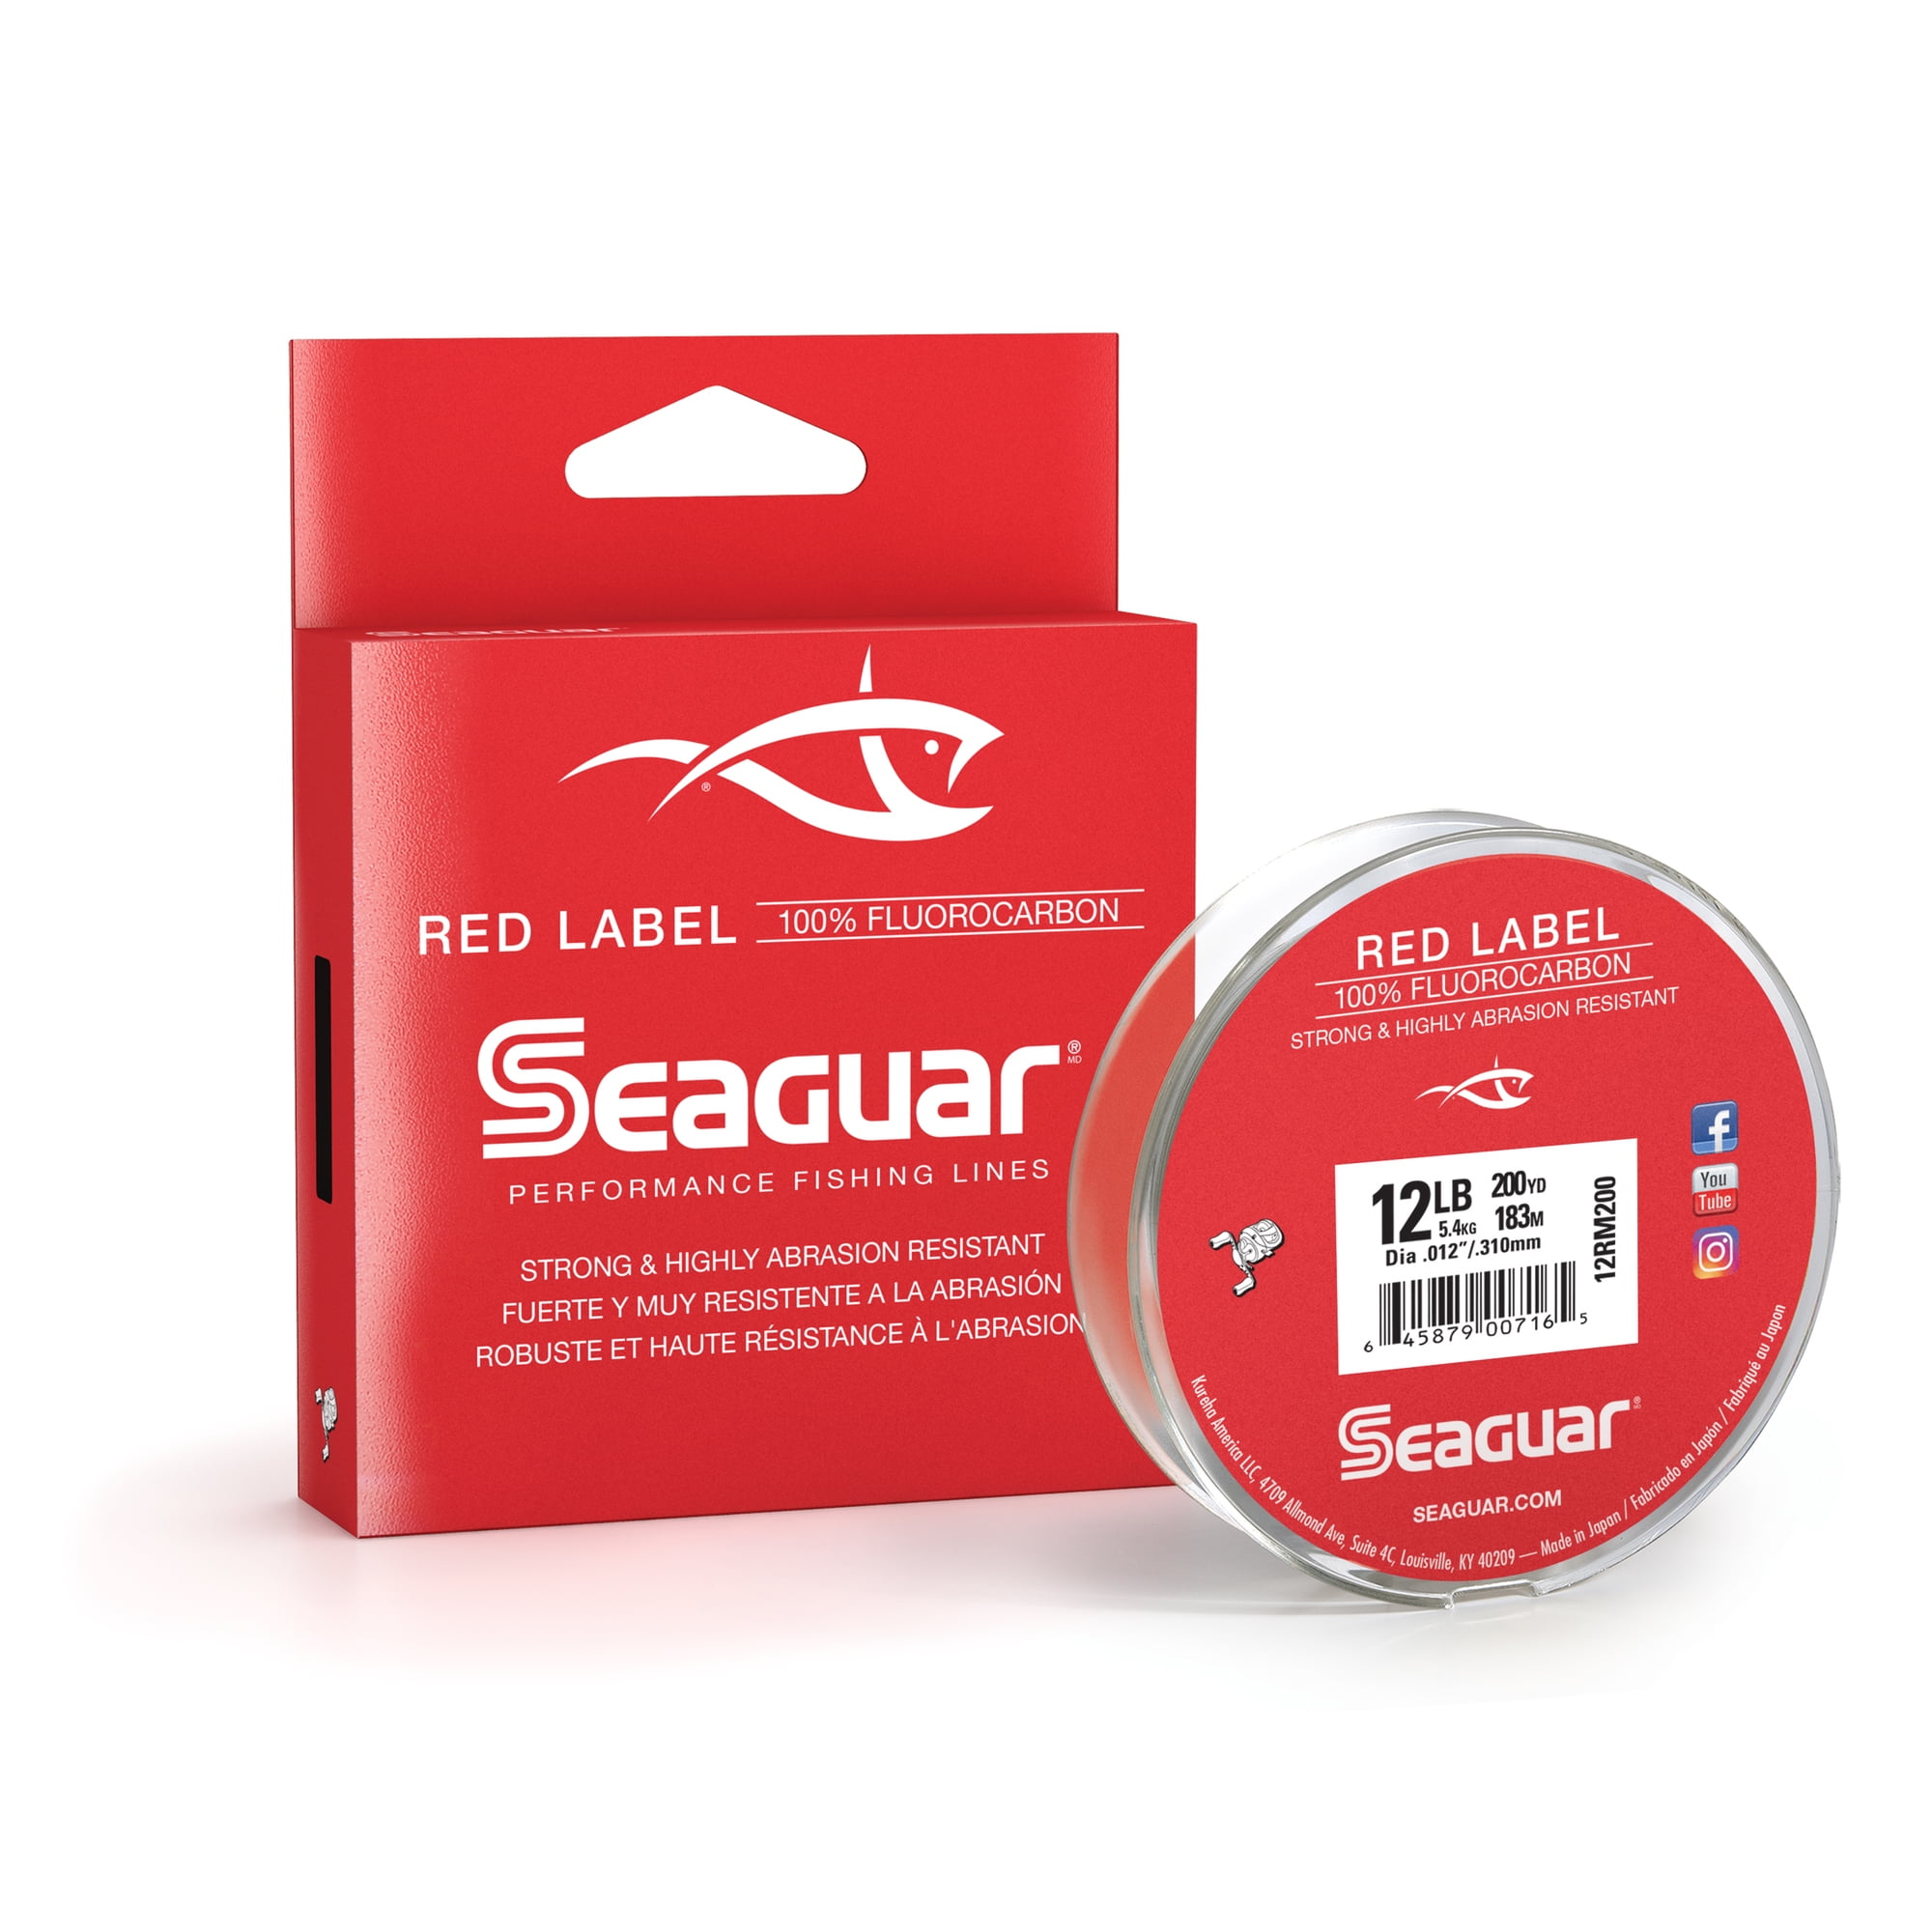 Seaguar Red Label 100% Fluorocarbon Fishing Line 12lbs, 200yds